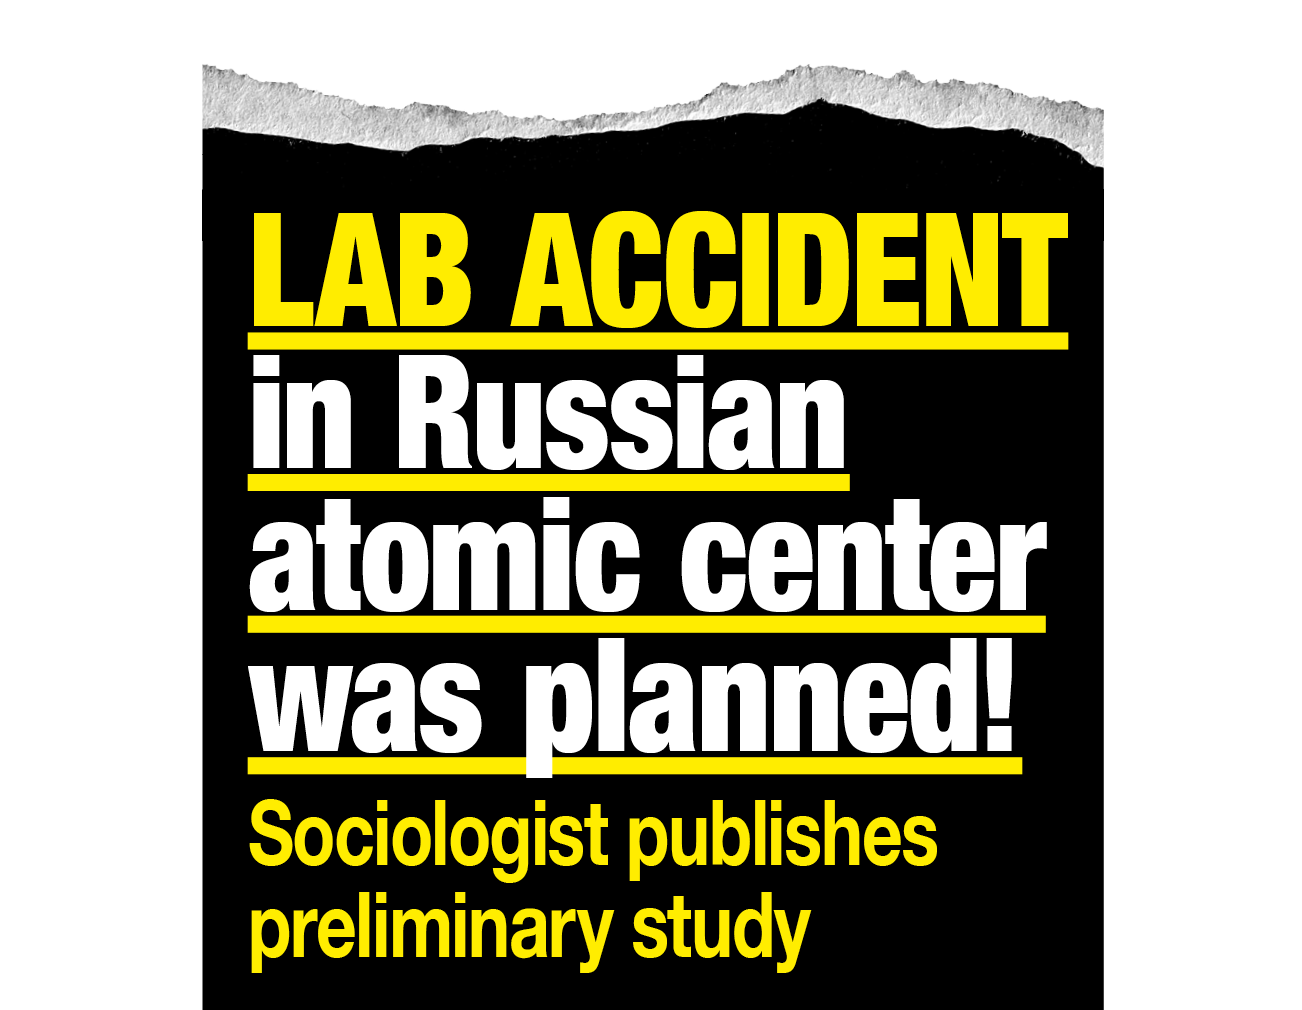 Sociologist publishes preliminary study: Lab accident in Russian atomic center was planned!